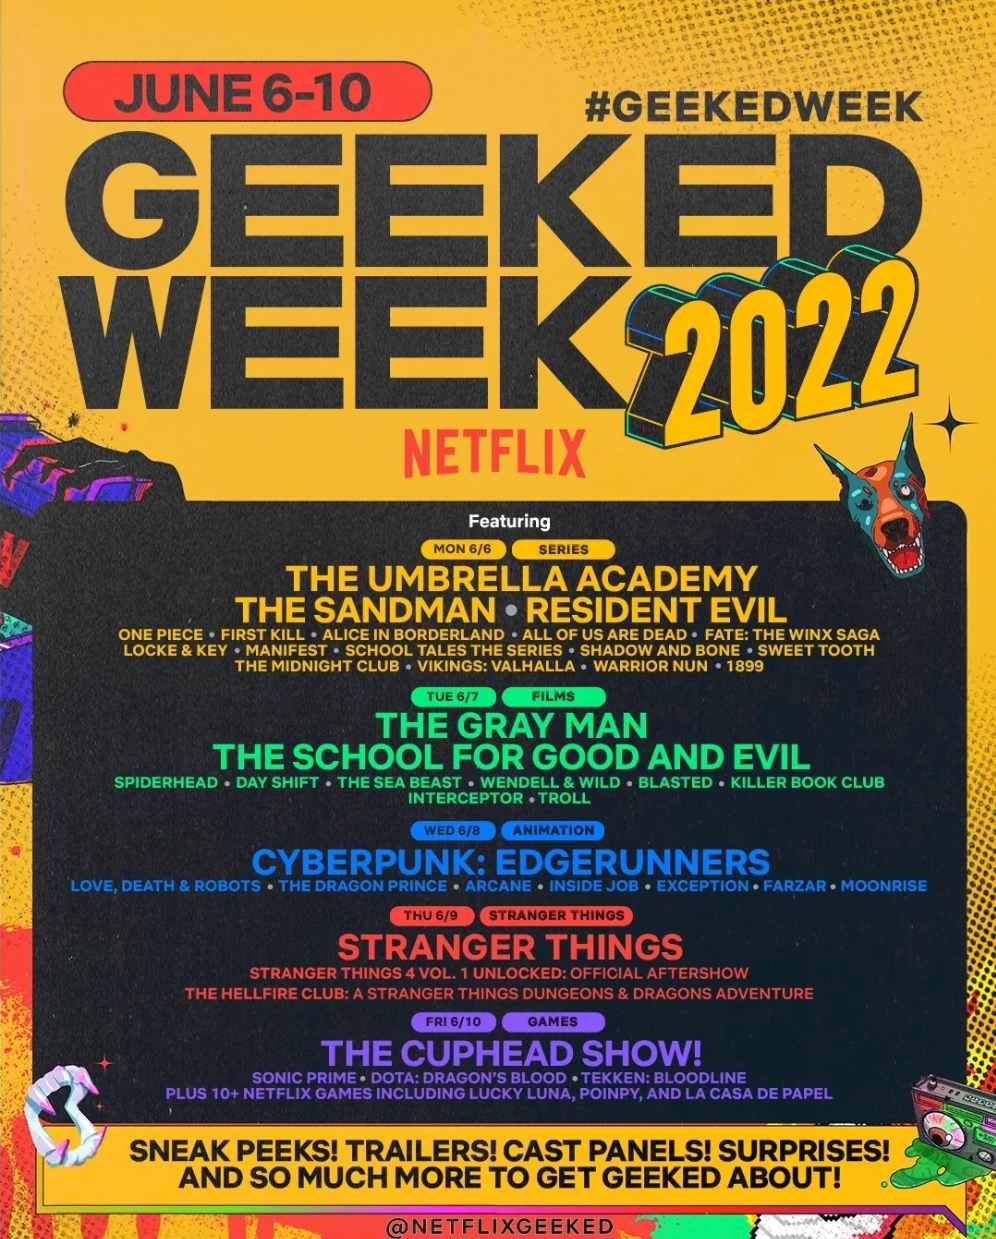 ‘Warrior Nun’, ‘1899’, ‘Wednesday’, And More Revealed As Part Of Netflix Geeked Week 2022